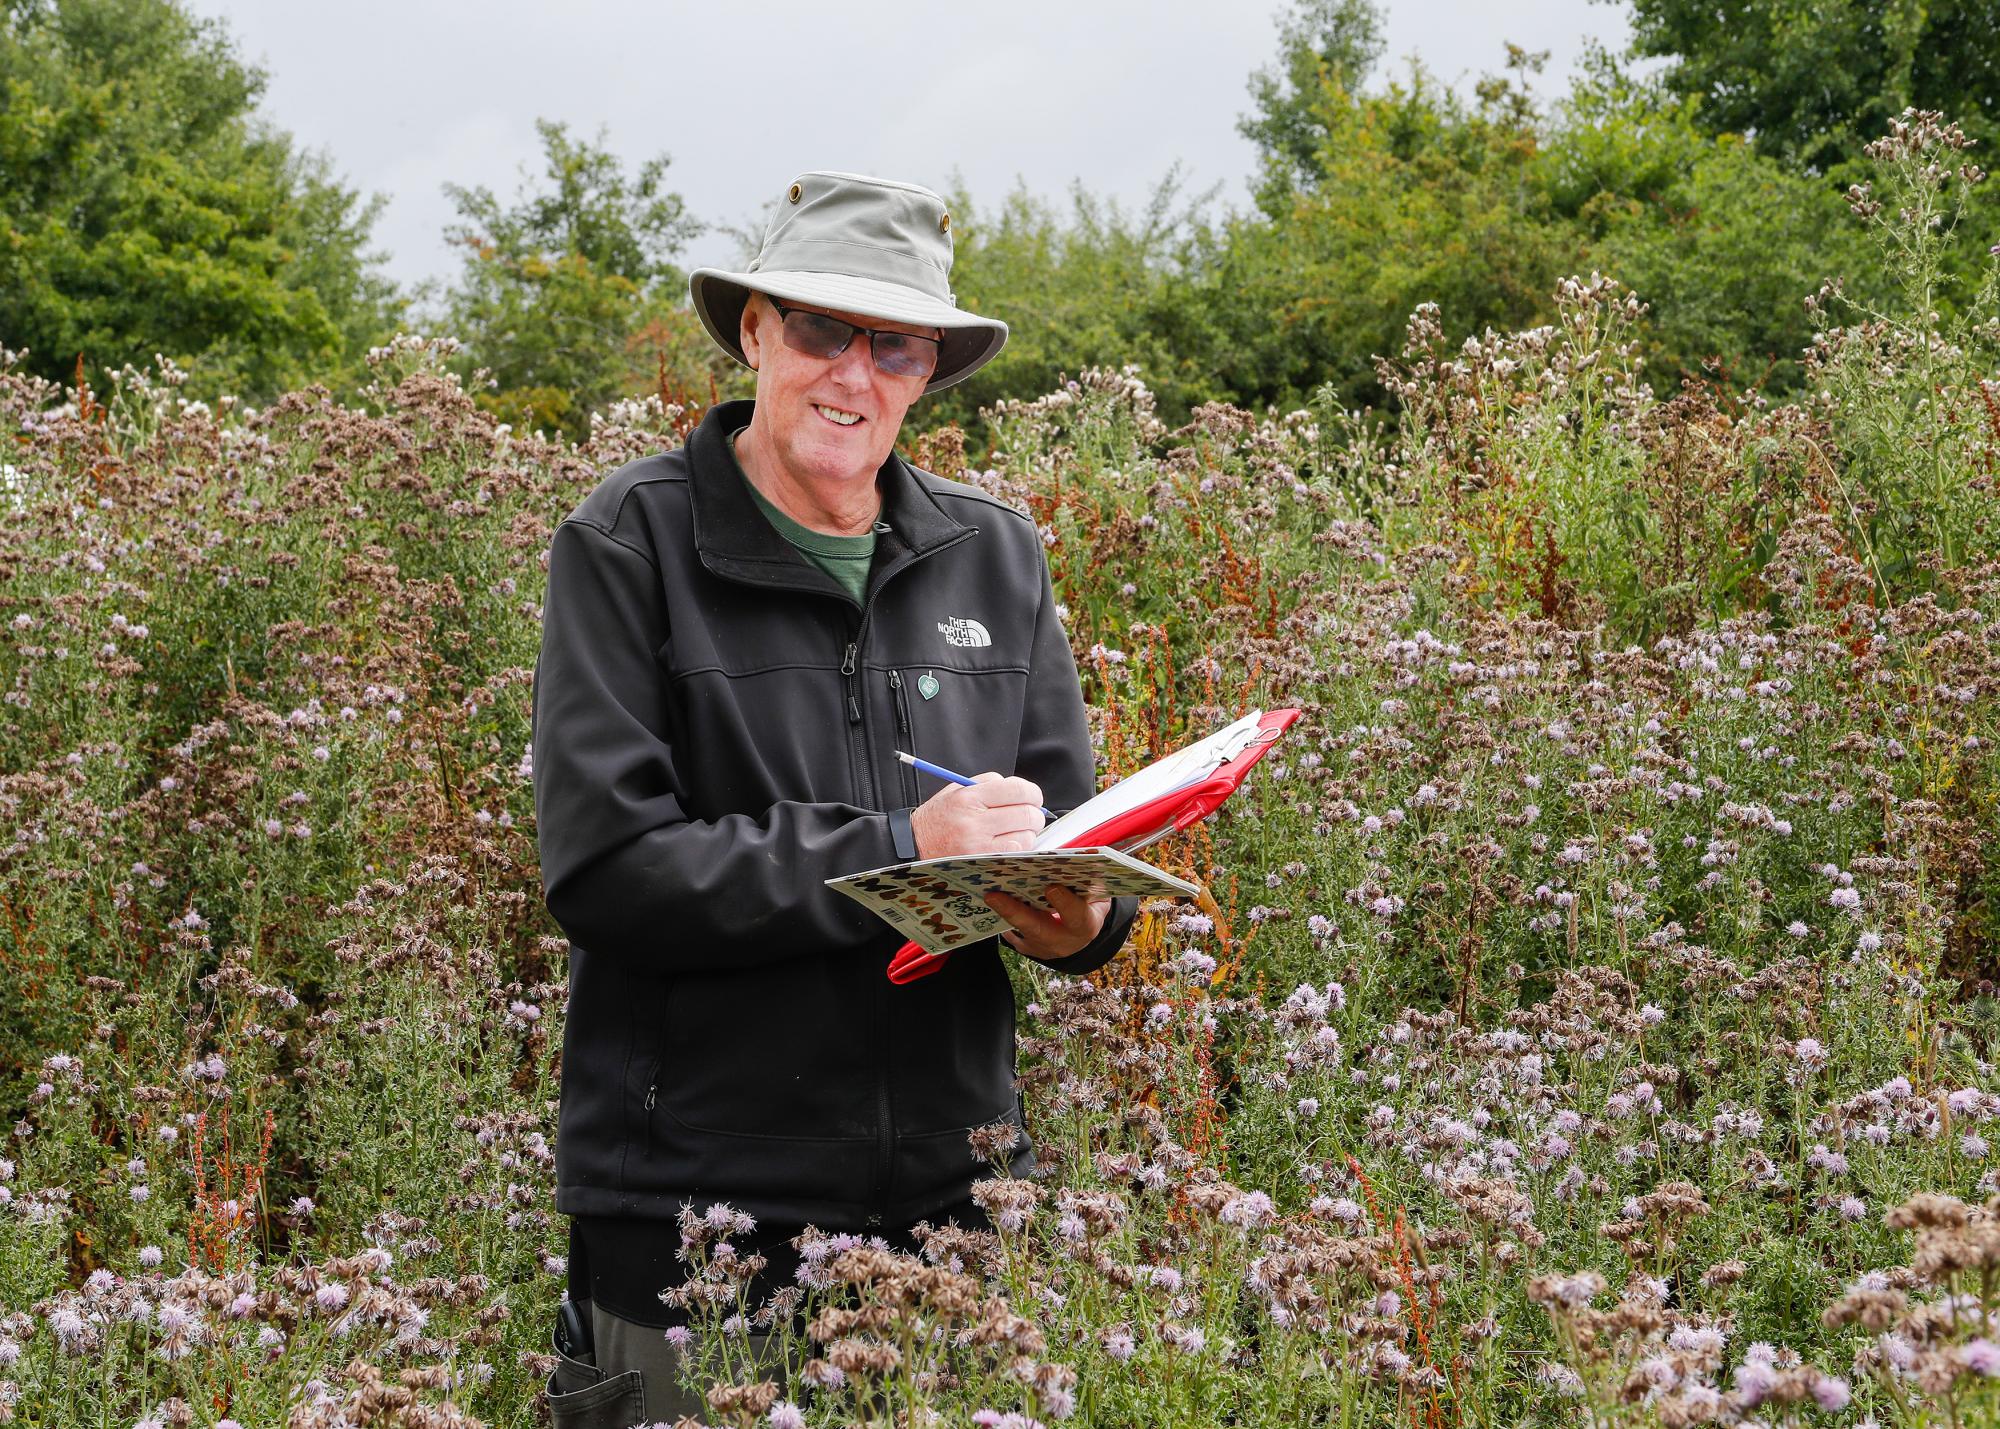 Ramsay, a Volunteer Leader conducting a butterfly survey in Morgrove Coppice. He is holding a form and Butterfly ID guide